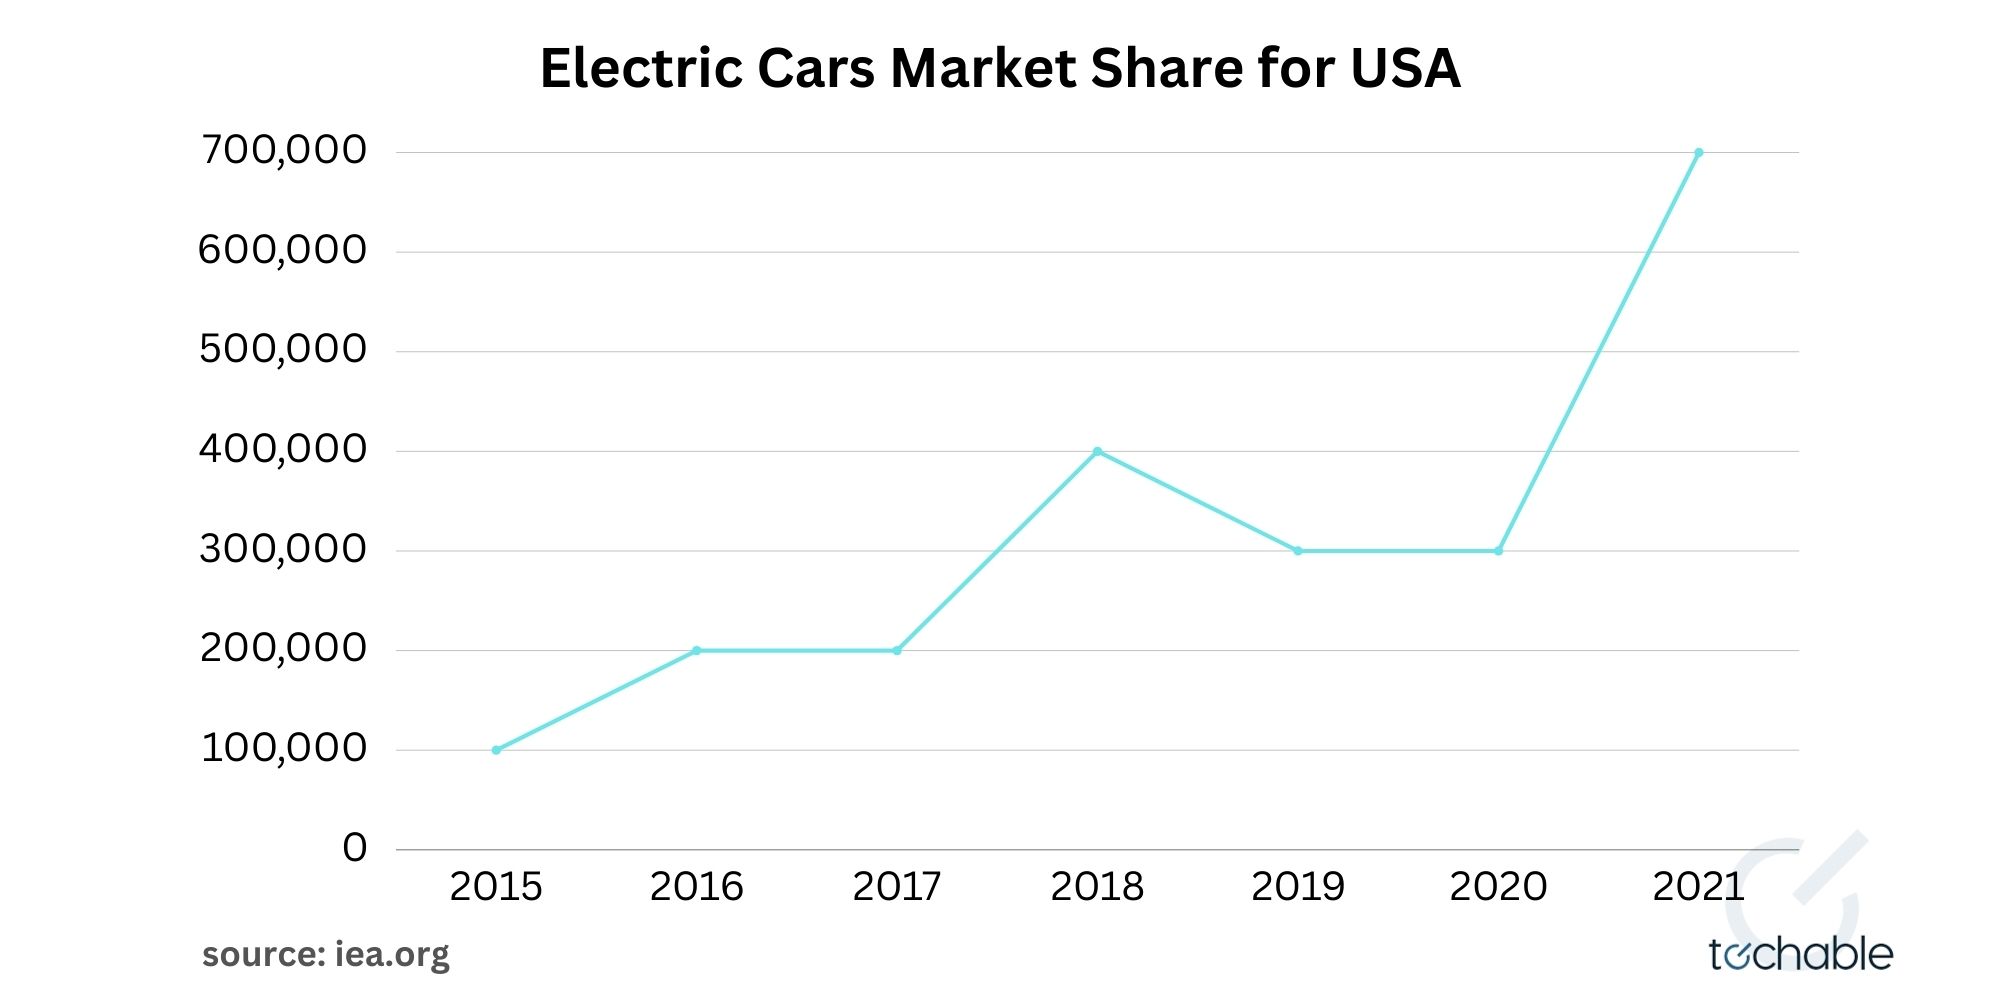 Electric Cars Market Share for USA